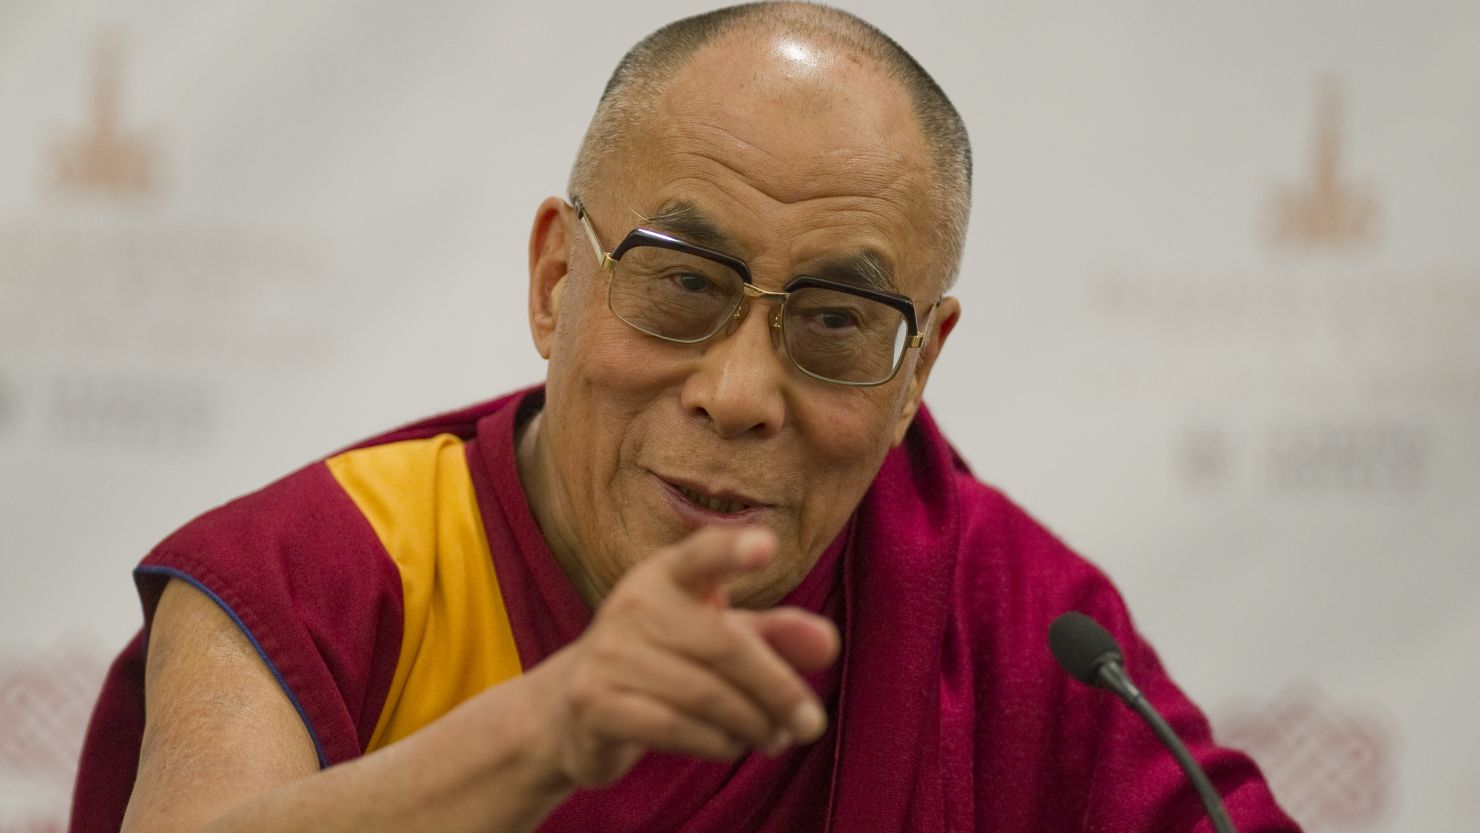 Tibetan spiritual leader, the Dalai Lama, speaks during a news conference in Mexico City on September 9, 2011.